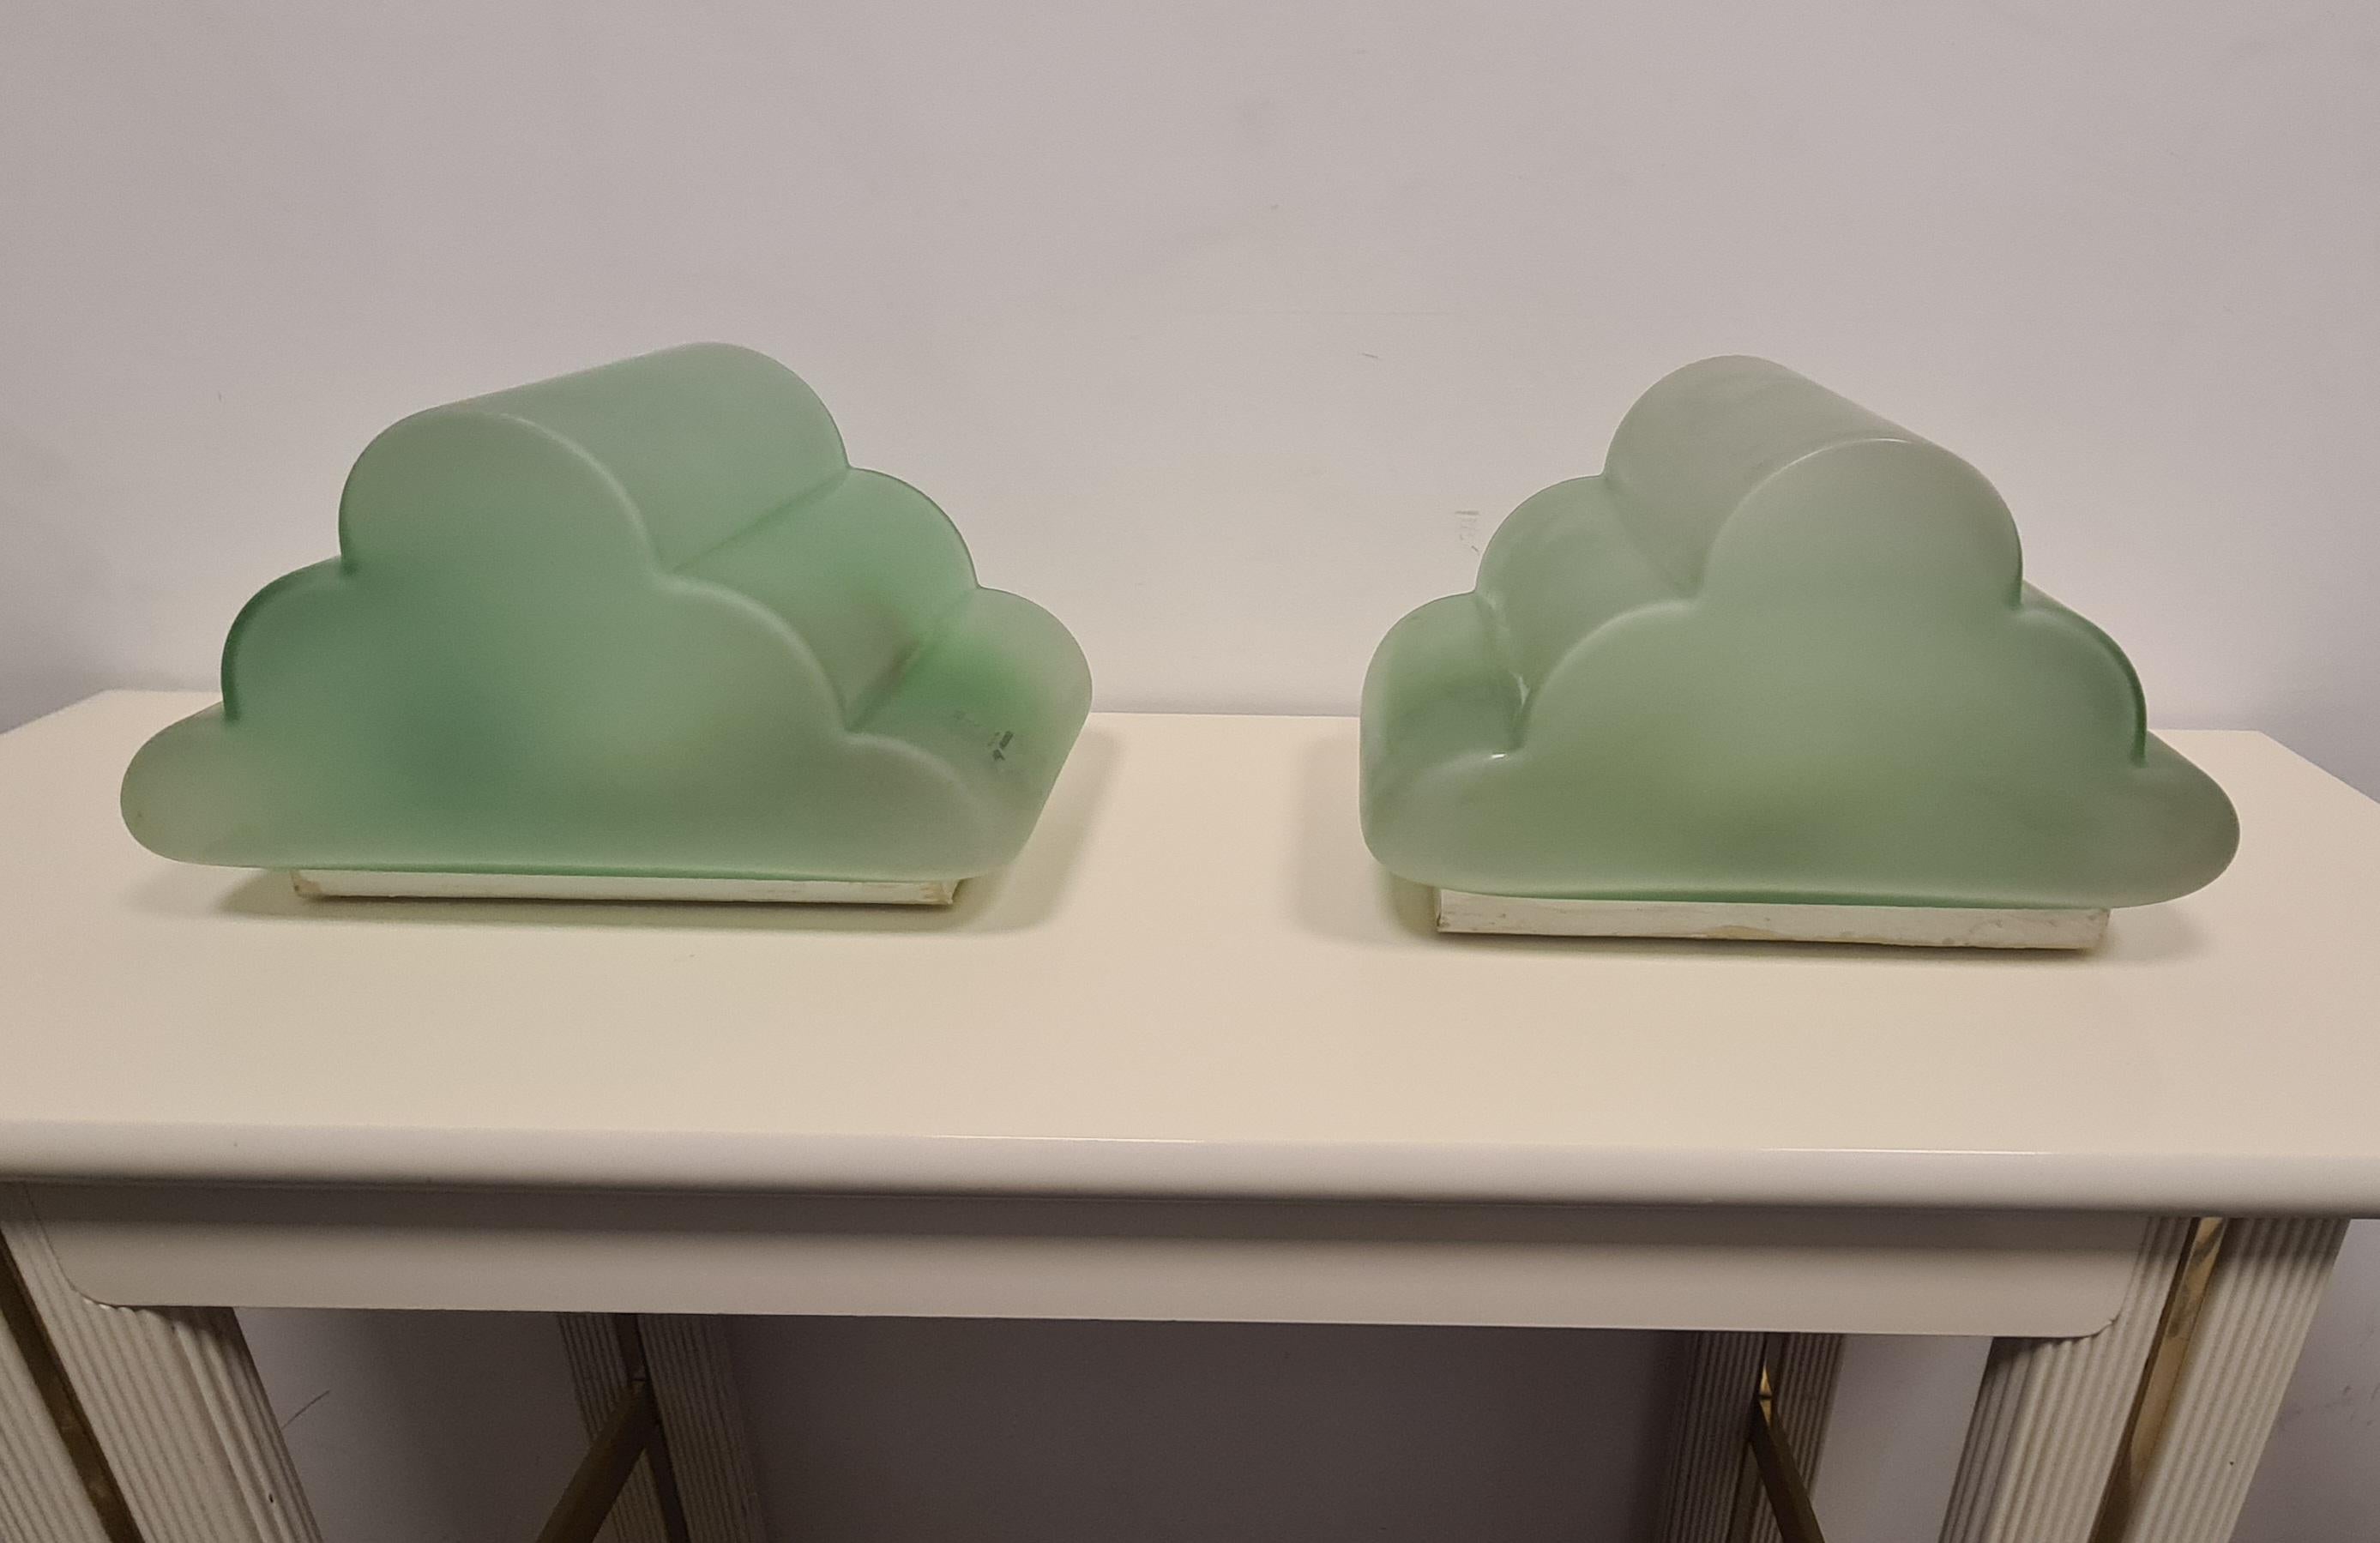 Pair of cute cloud-shaped wall sconces.

The wall sconces have a white metal base, while the hat is made of Tiffany green frosted murano glass.

This pair of fairy-tale wall lamps were made by Murano-based company Murano Due Venezia.

Ideal for